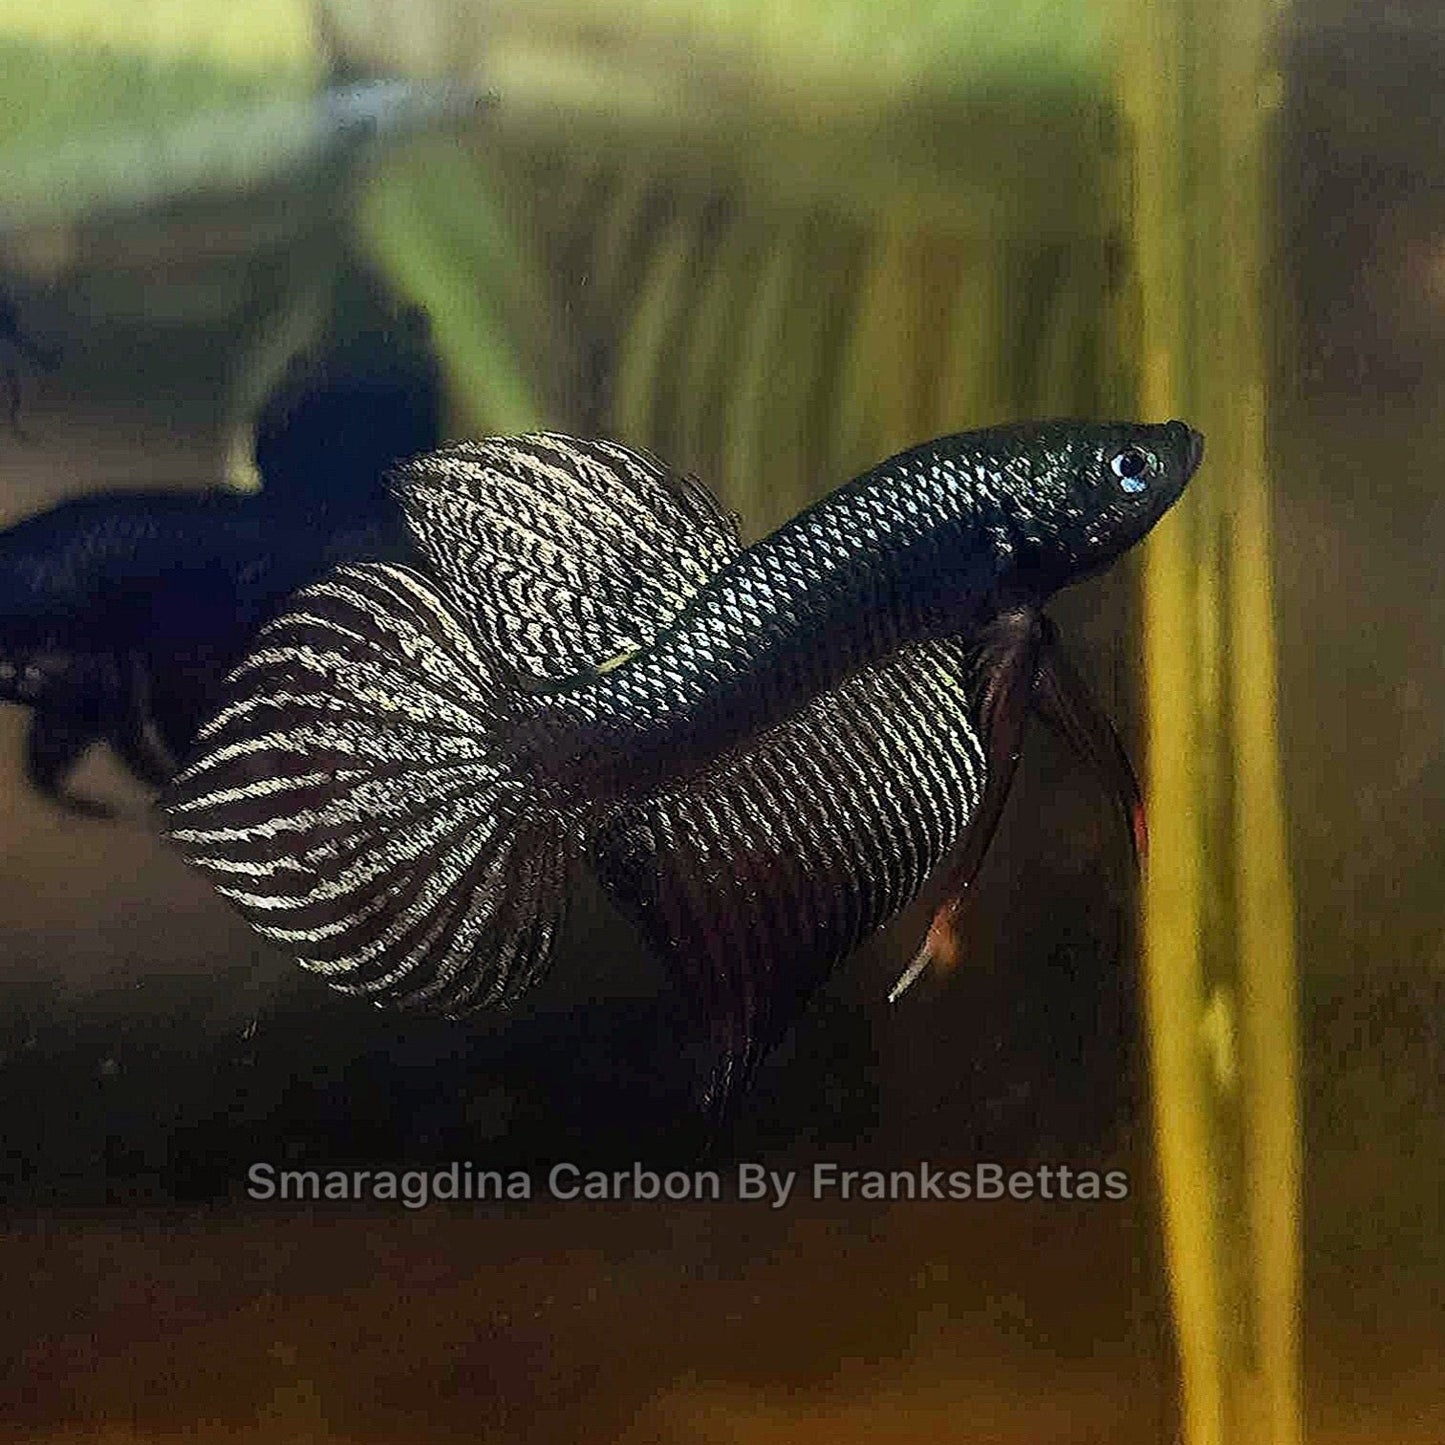 Carbon Smaragdina Pair (RARE Found only from FranksBettas)